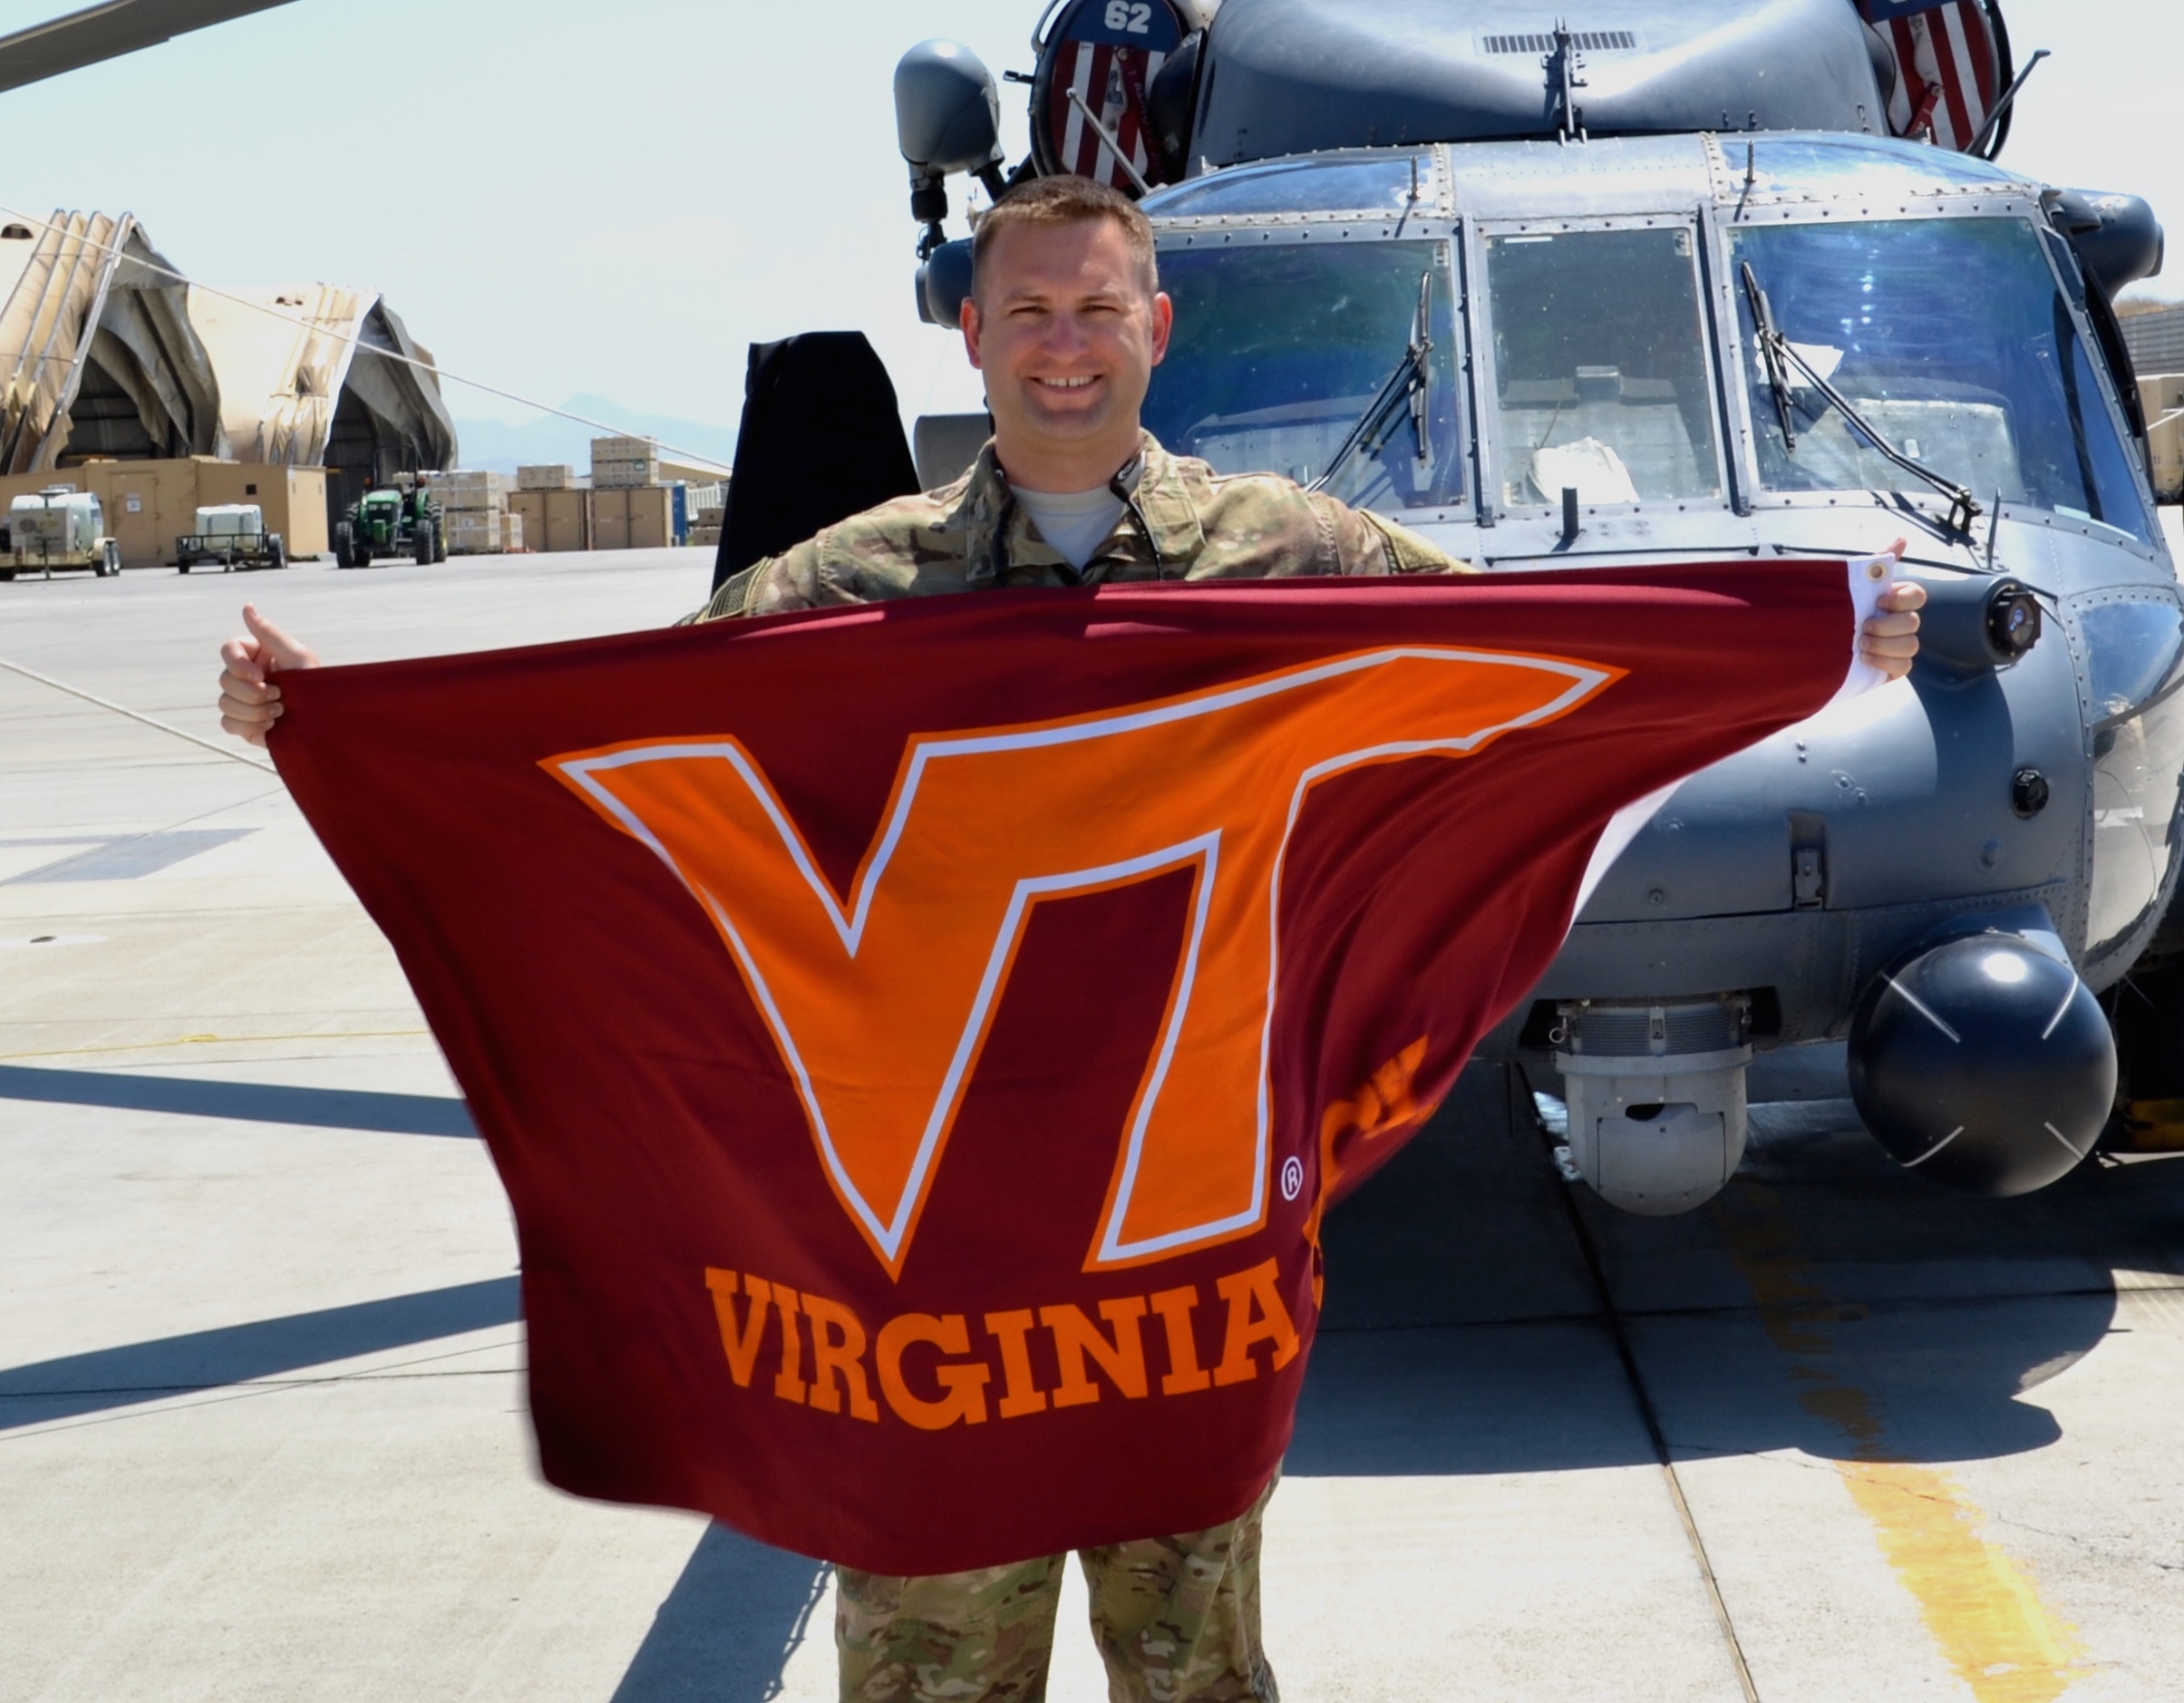 Capt. Chris Horsfall, U.S. Air Force, Virginia Tech Corps of Cadets Class of 2006 in Afghanistan.